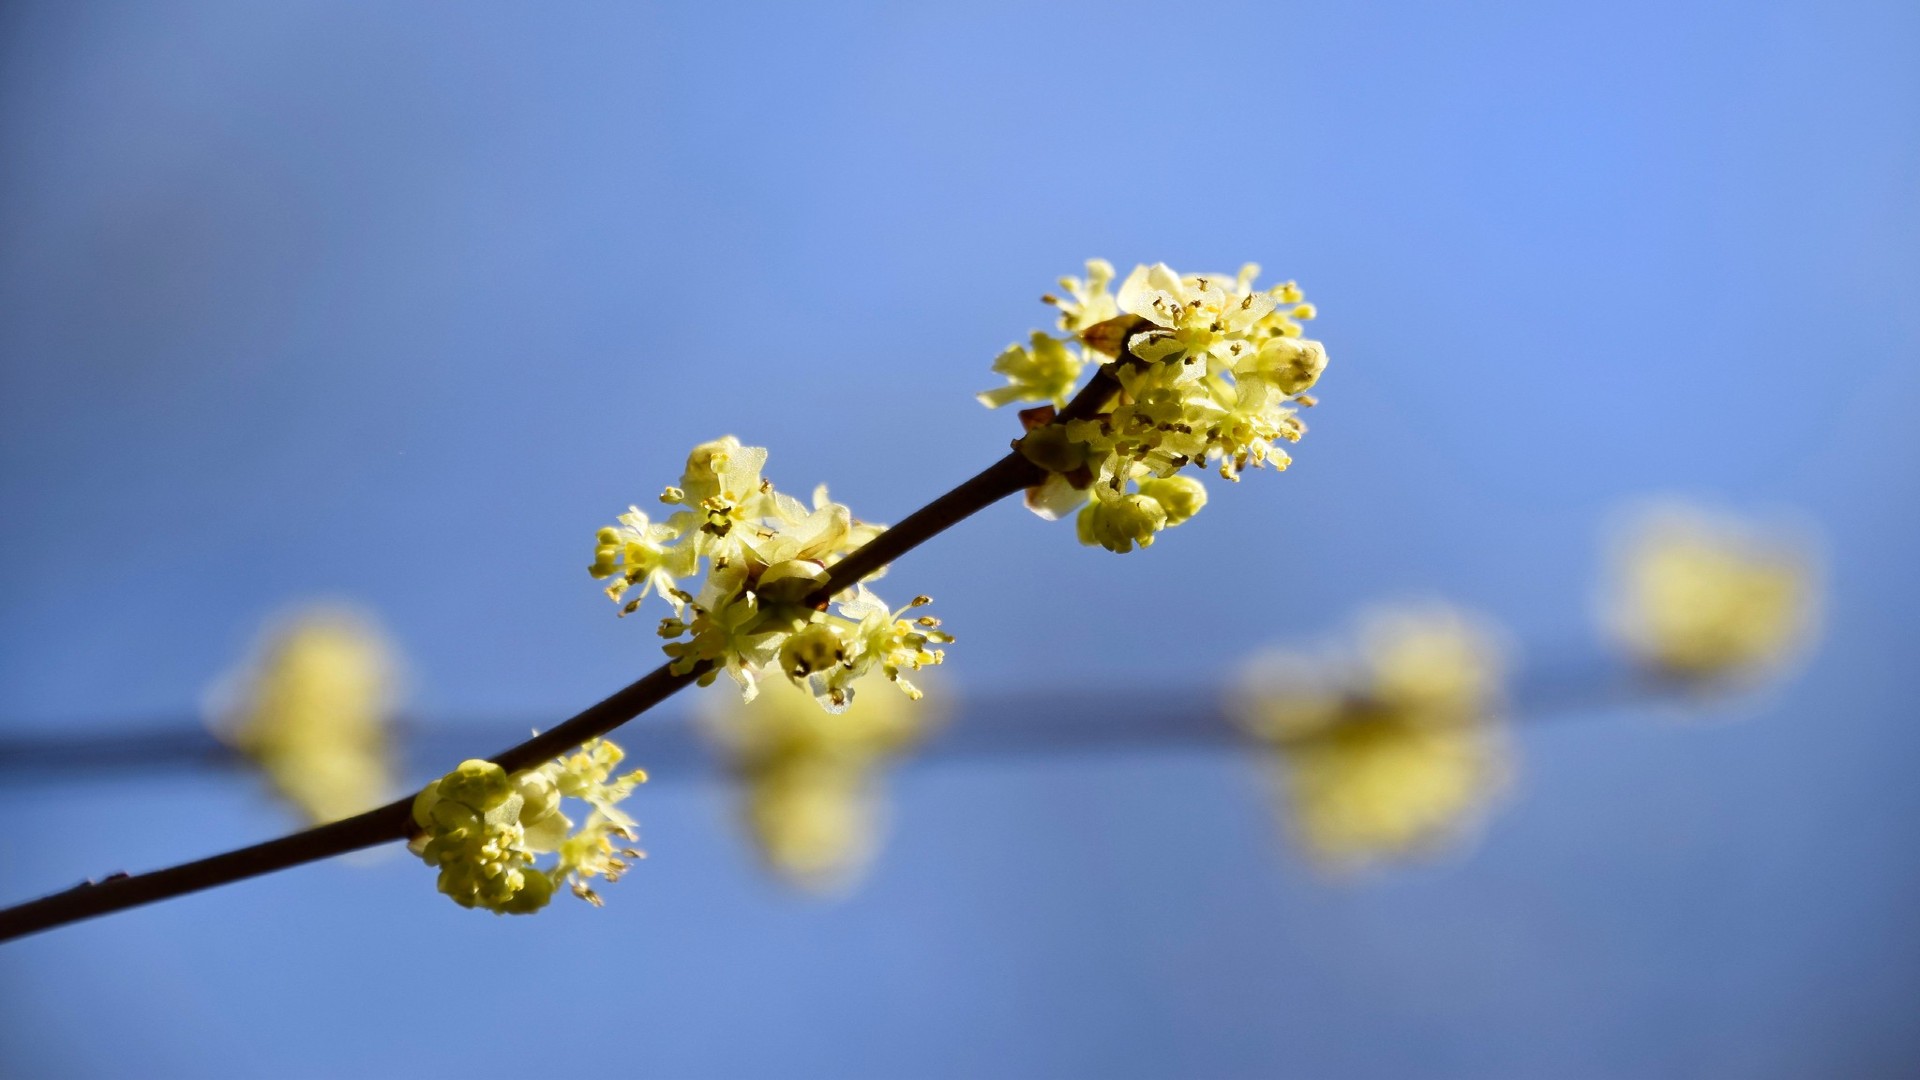 The yellow flowers of a northern spicebush are blooming